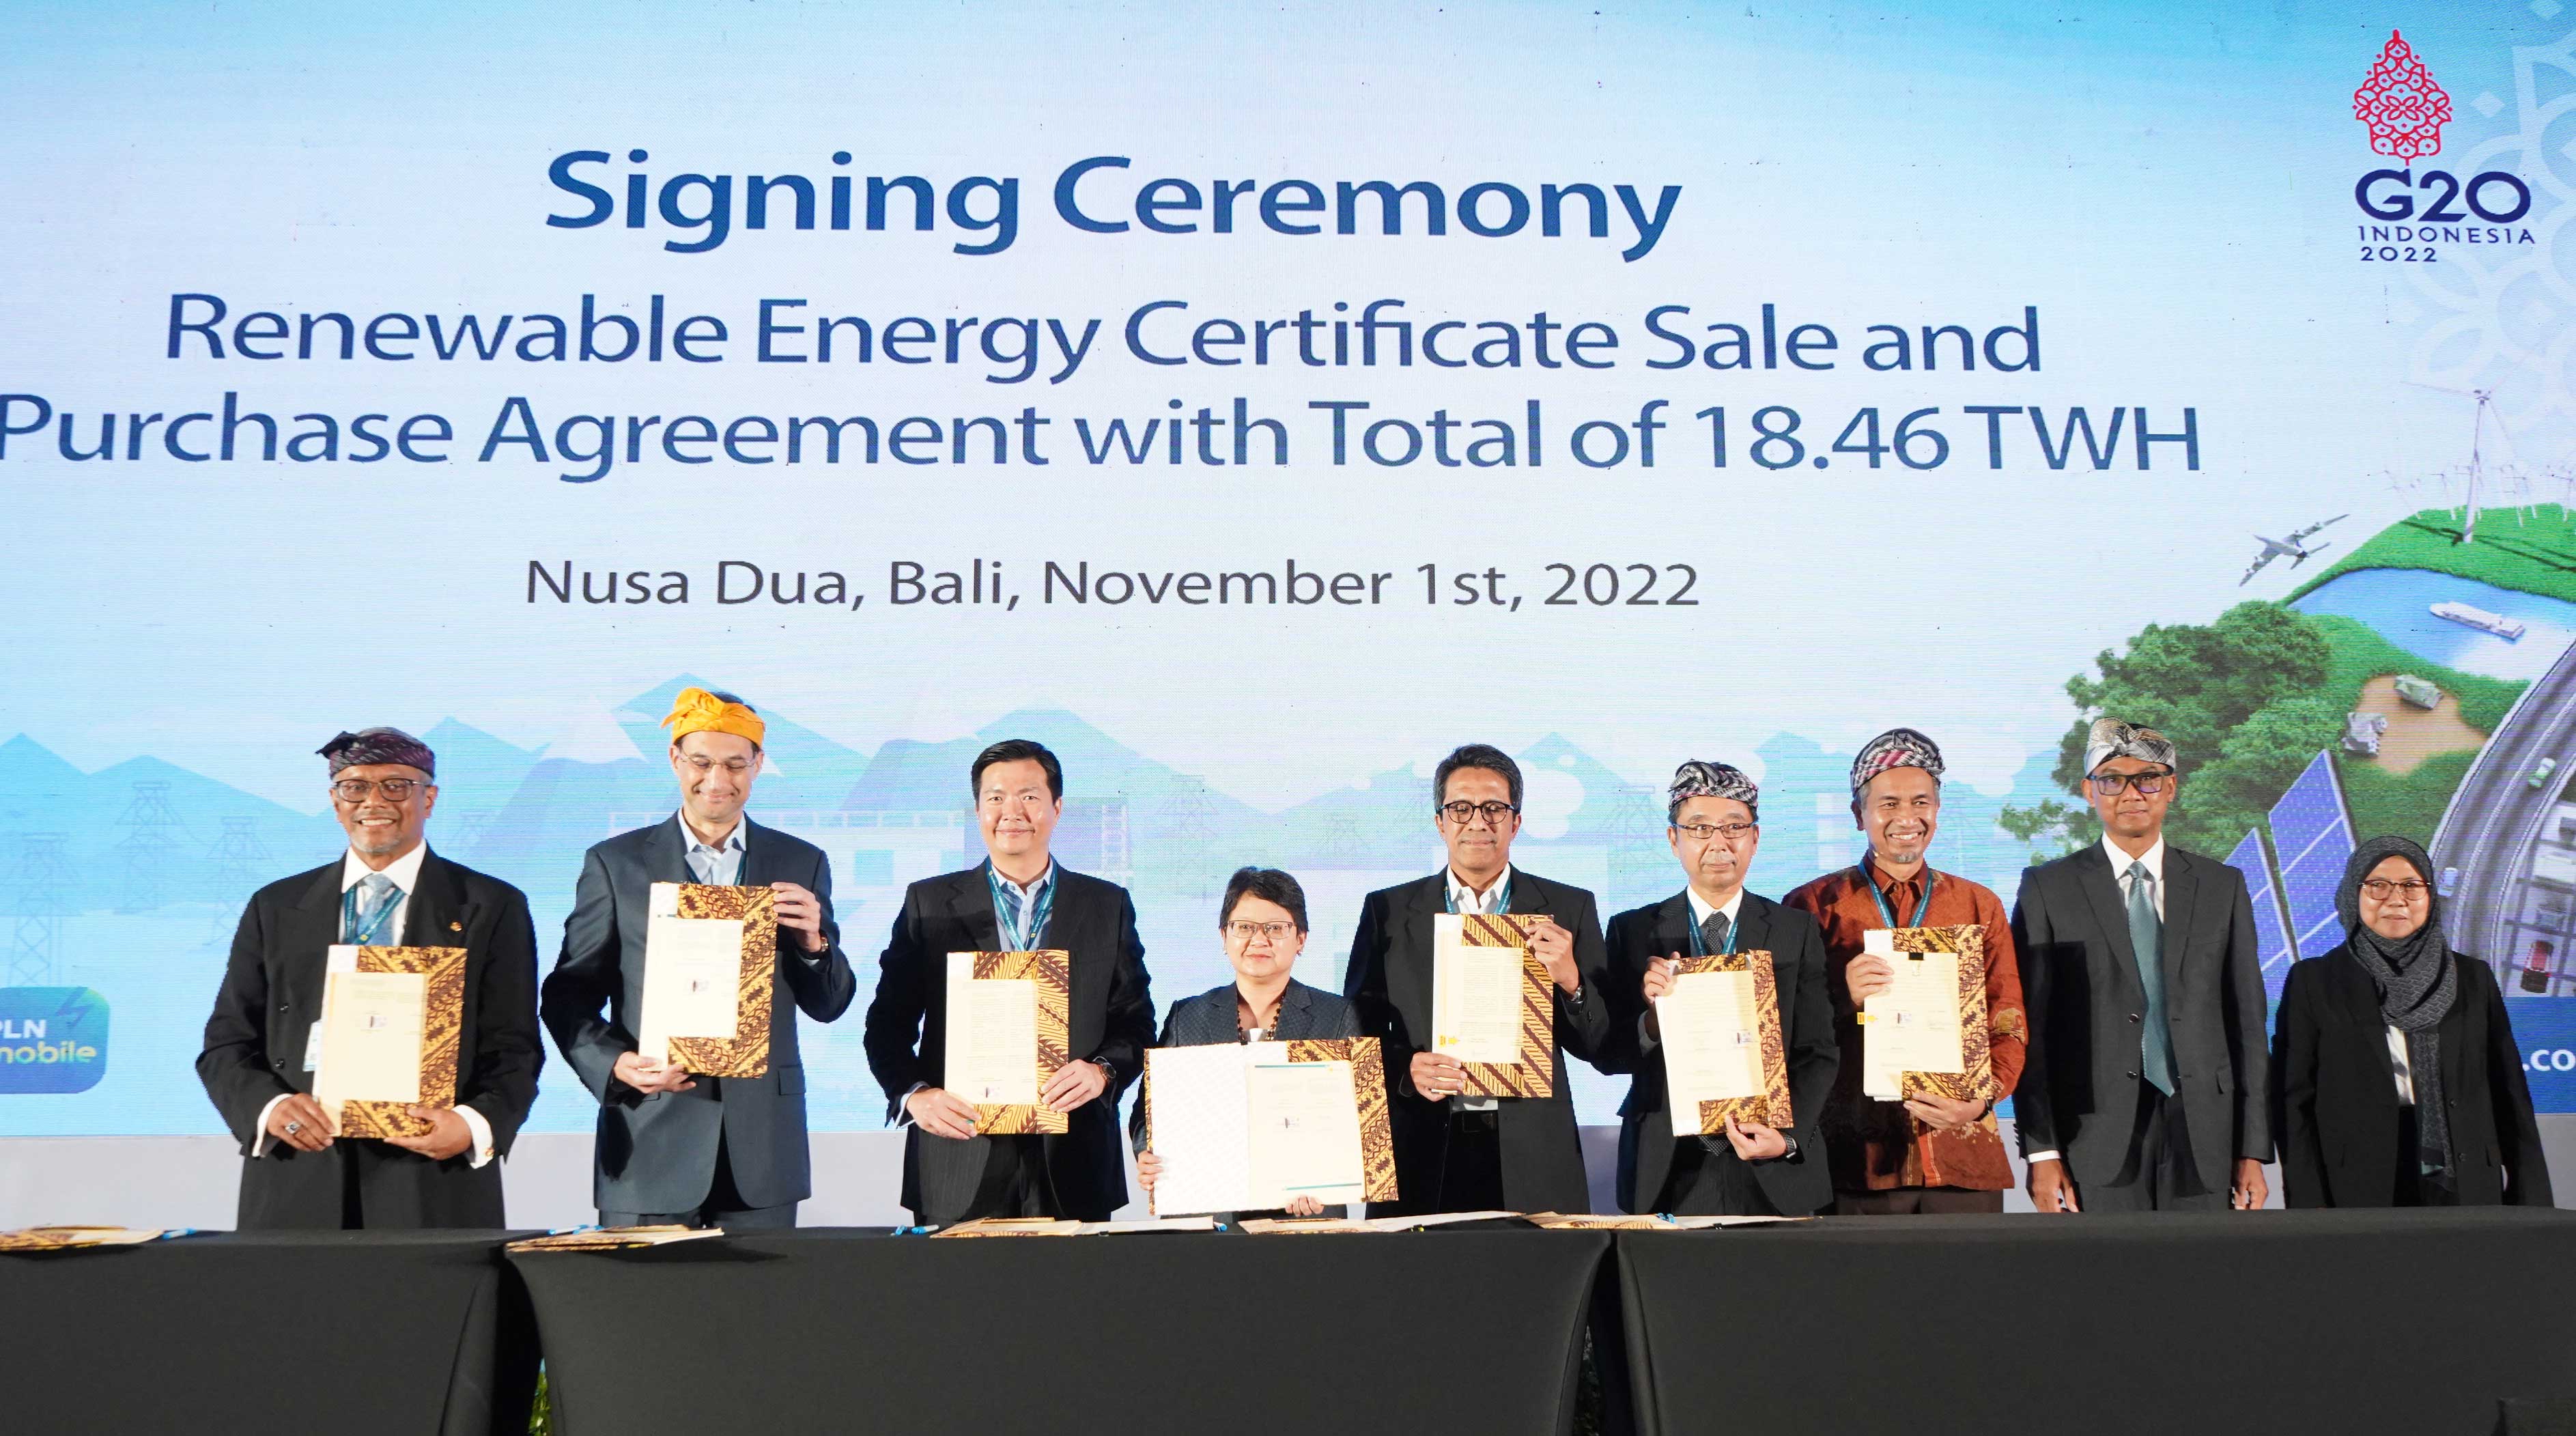 The Tujuh Bukit Gold Mine signed an agreement to purchase electricity from PLN originating from a power plant sourced from renewable energy.